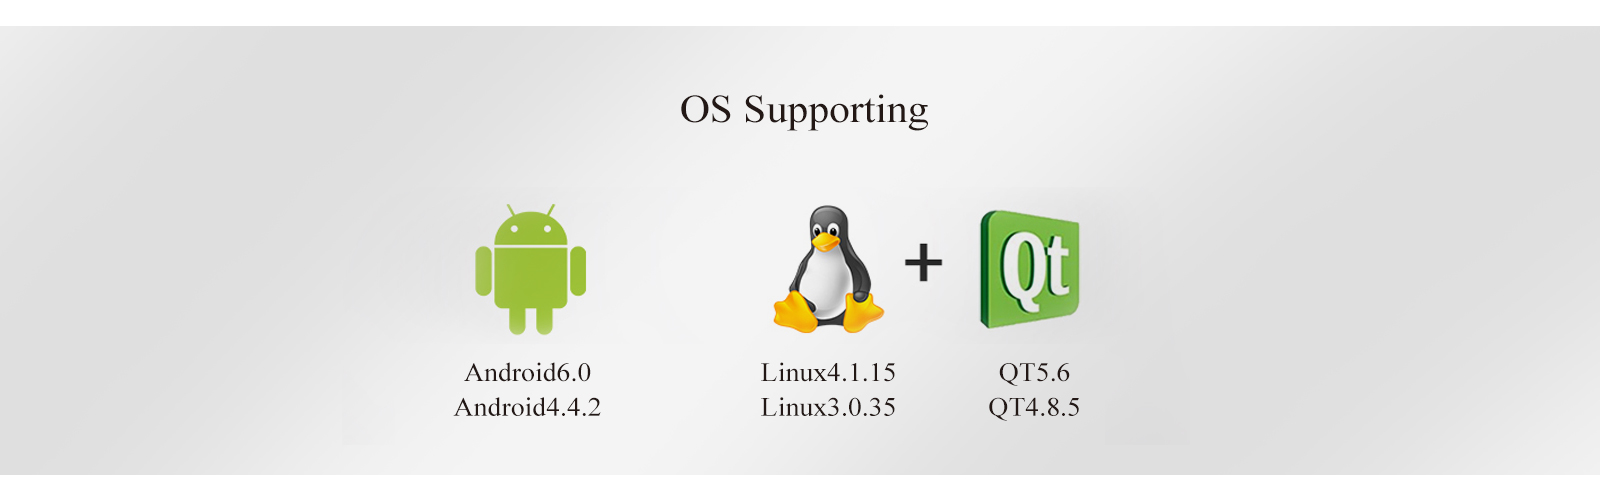 OS supporting